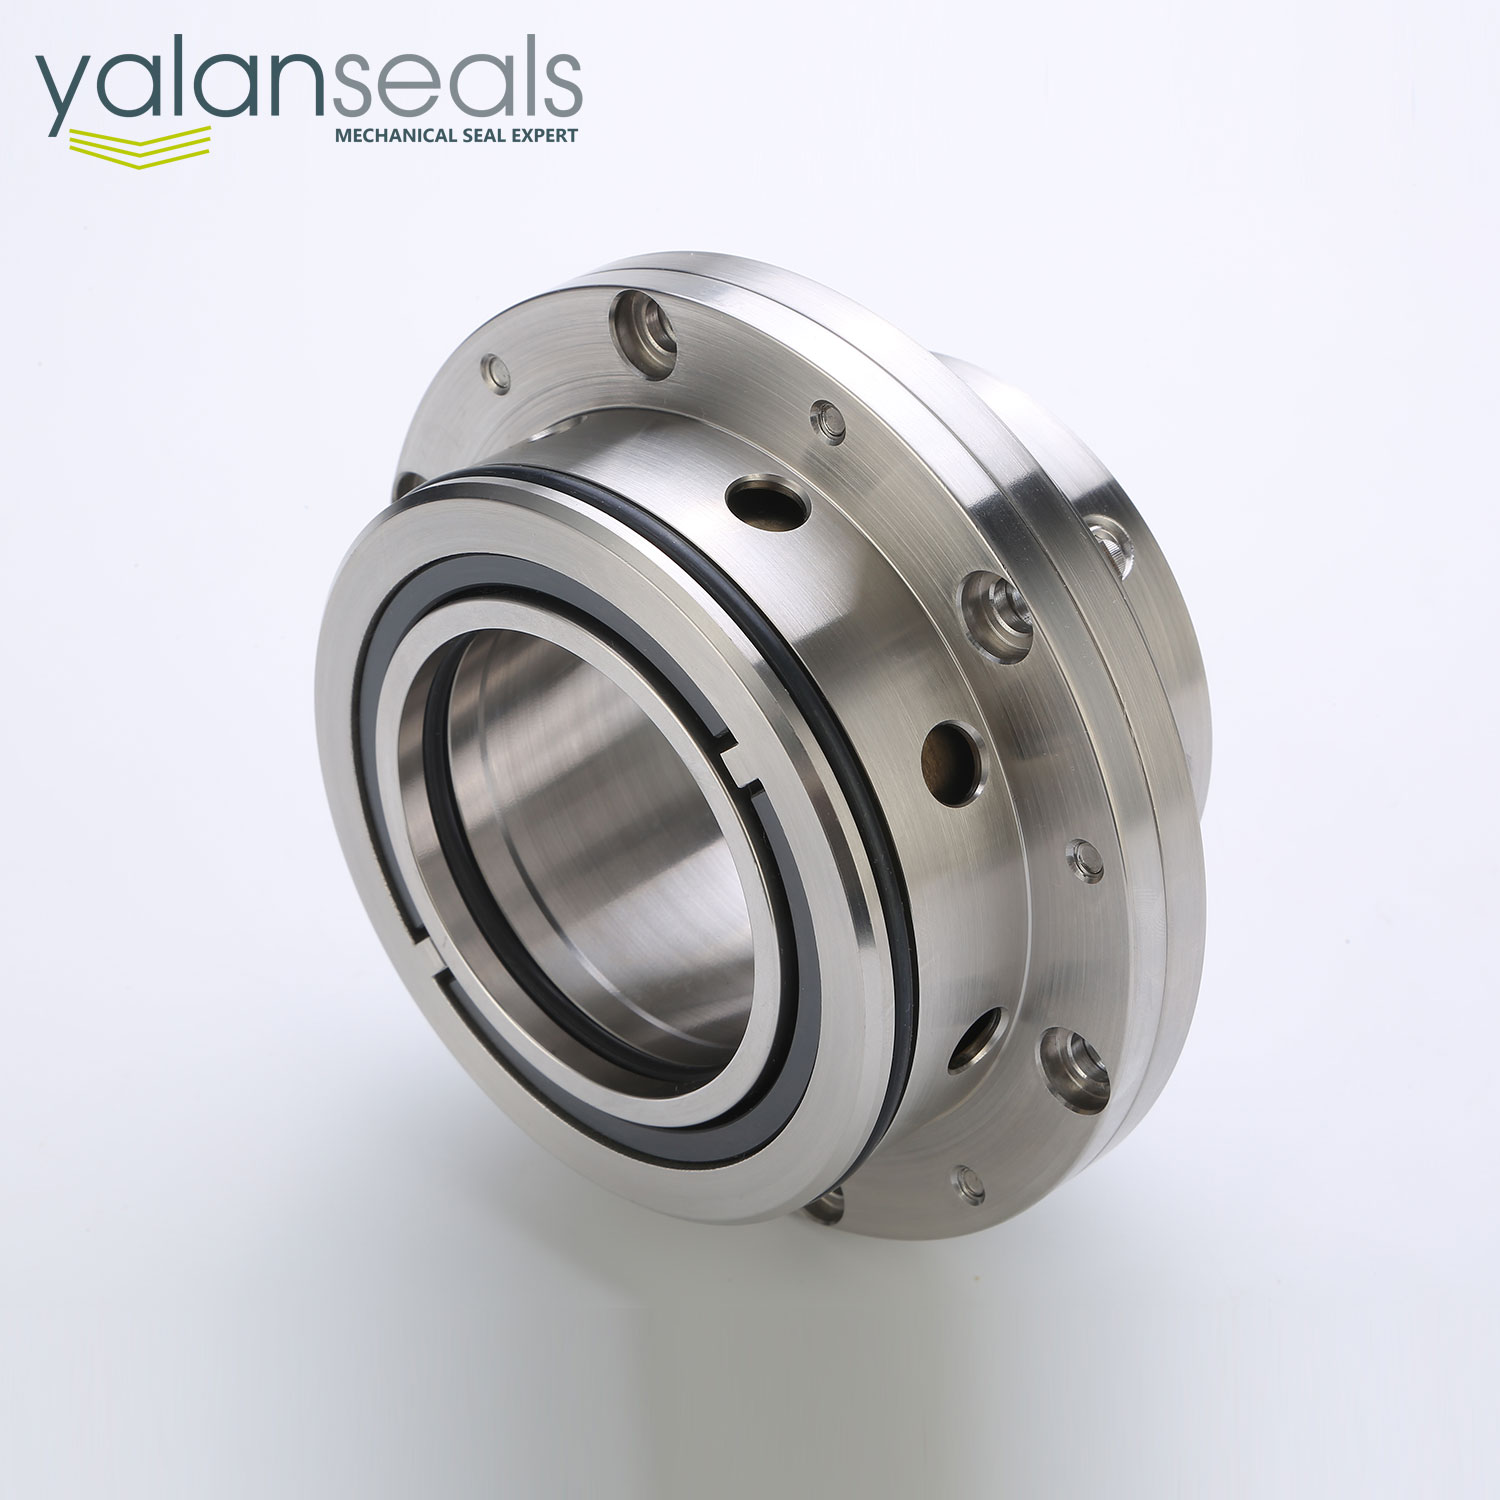 YALAN UU7002J Cartridge Seal for Roots Blowers and Compressors